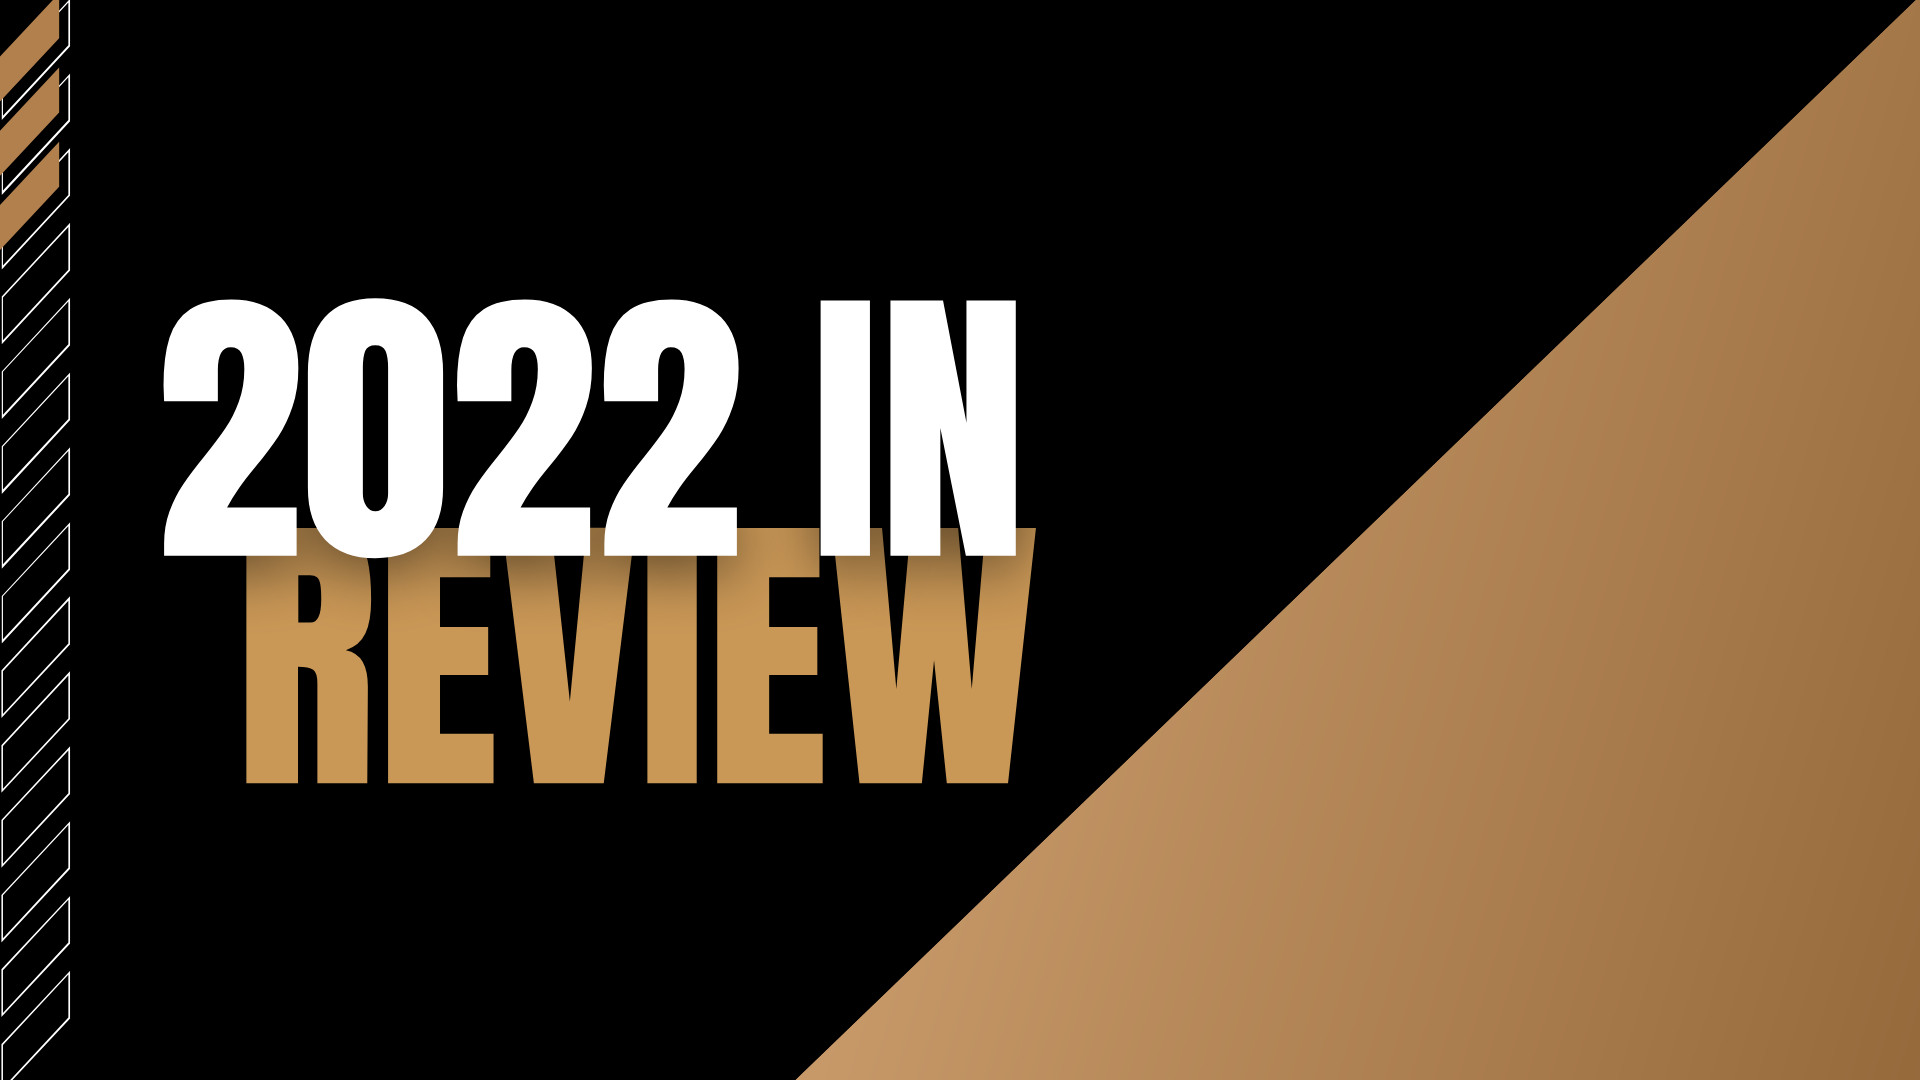 2022 in Review